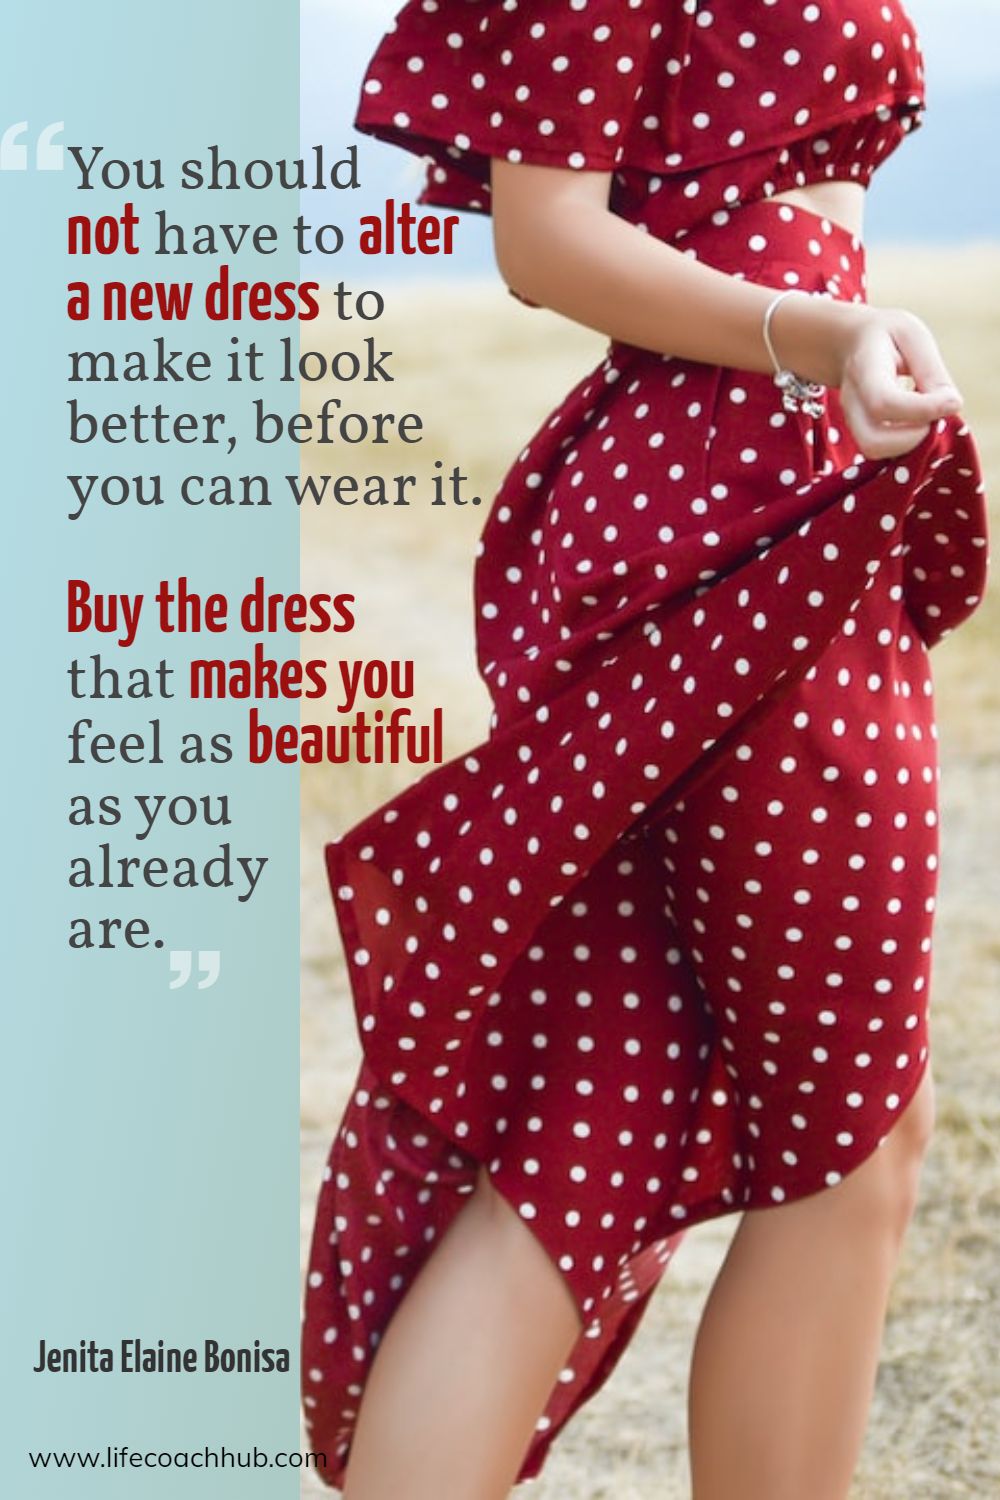 You should not have to alter a new dress to make it look better, before you can wear it. Buy the dress that makes you feel as beautiful as you already are. Jenita Elaine Bonisa Coaching Quote